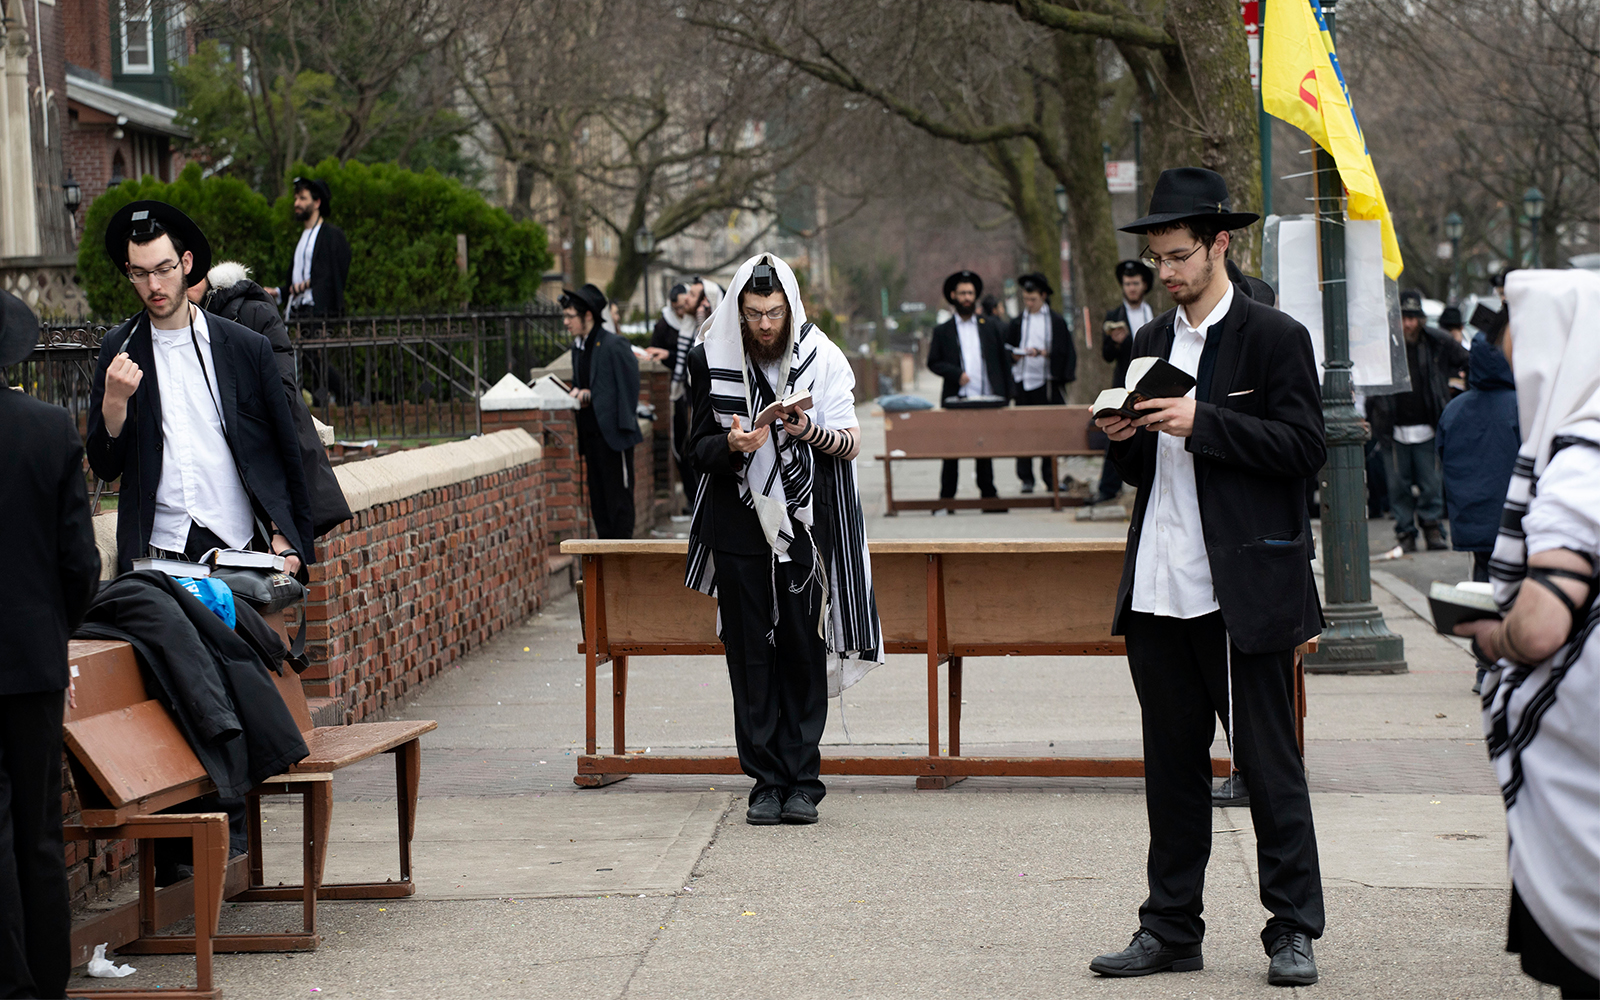 Ultra-Orthodox Jewish men use “social distancing” as they pray outside the Chabad Lubavitch World Headquarters, in Brooklyn, New York, March 20, 2020. (AP/Mark Lennihan)